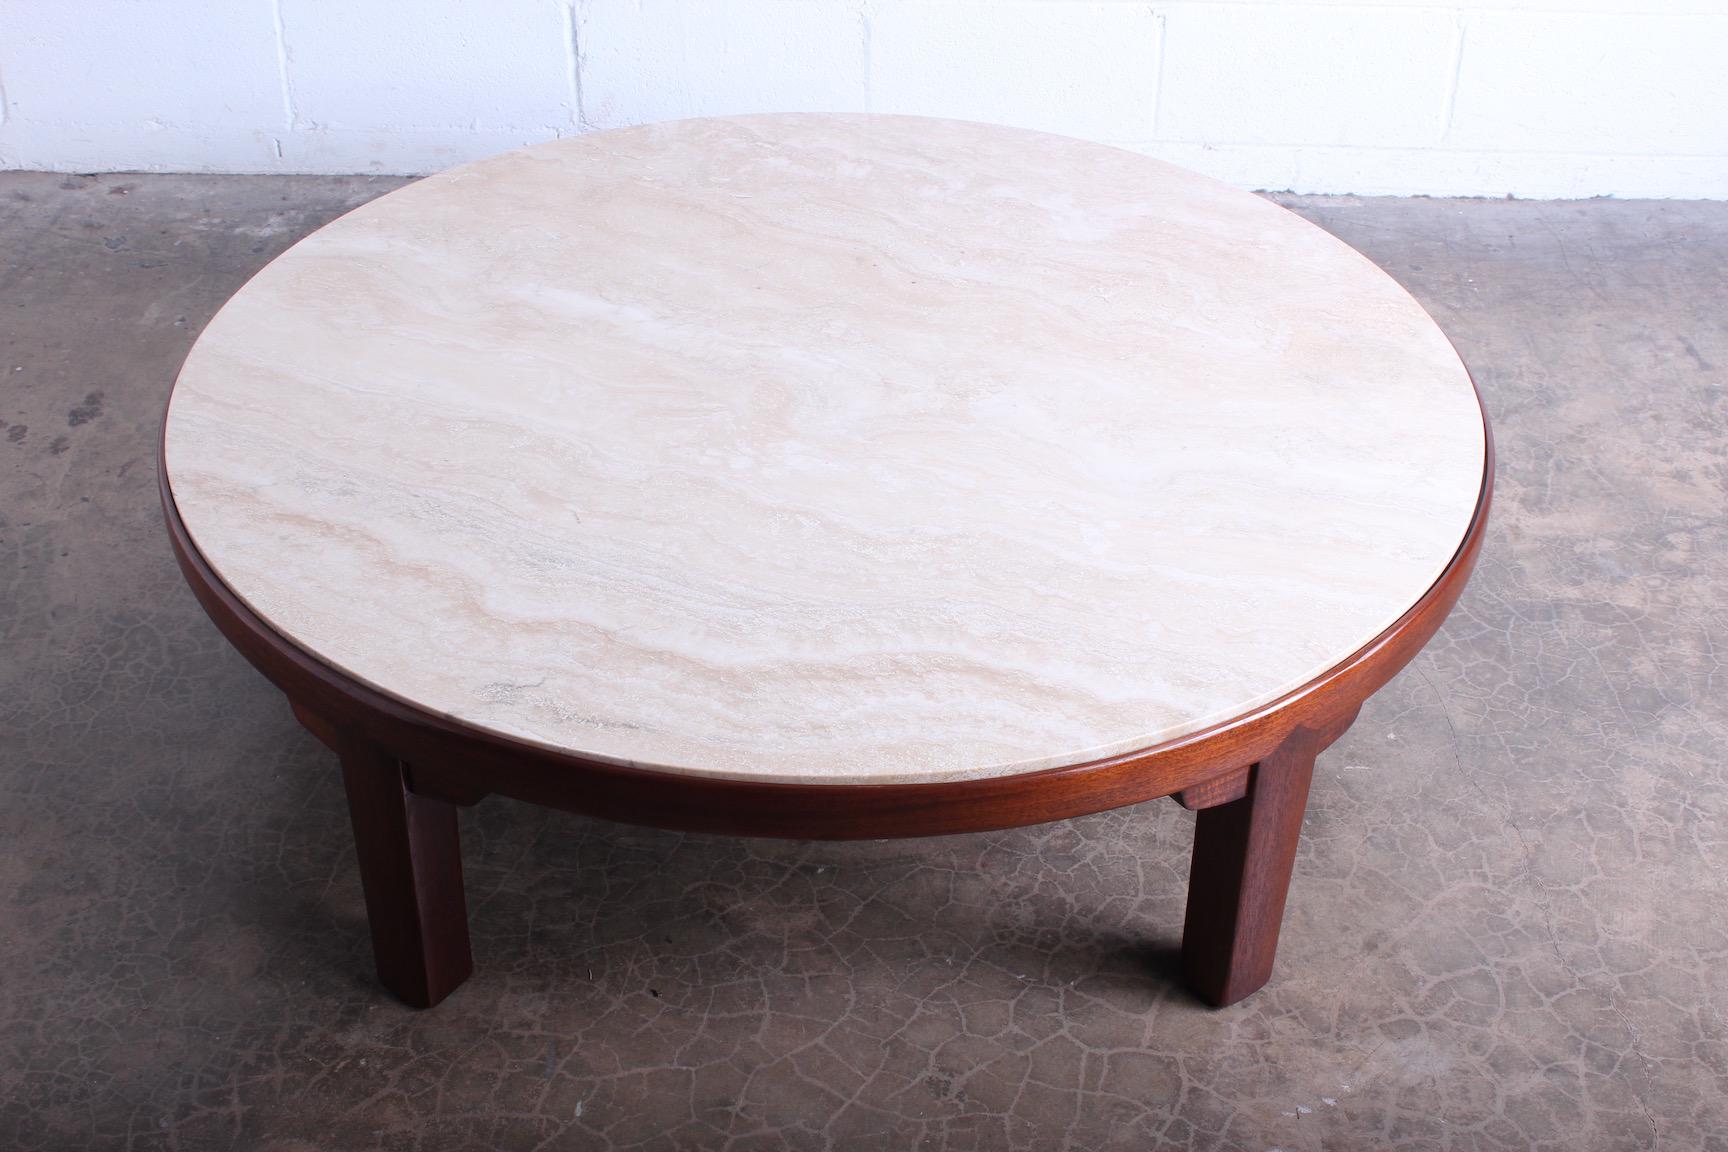 A mahogany coffee table with inset travertine top. Designed by Edward Wormley for Dunbar.